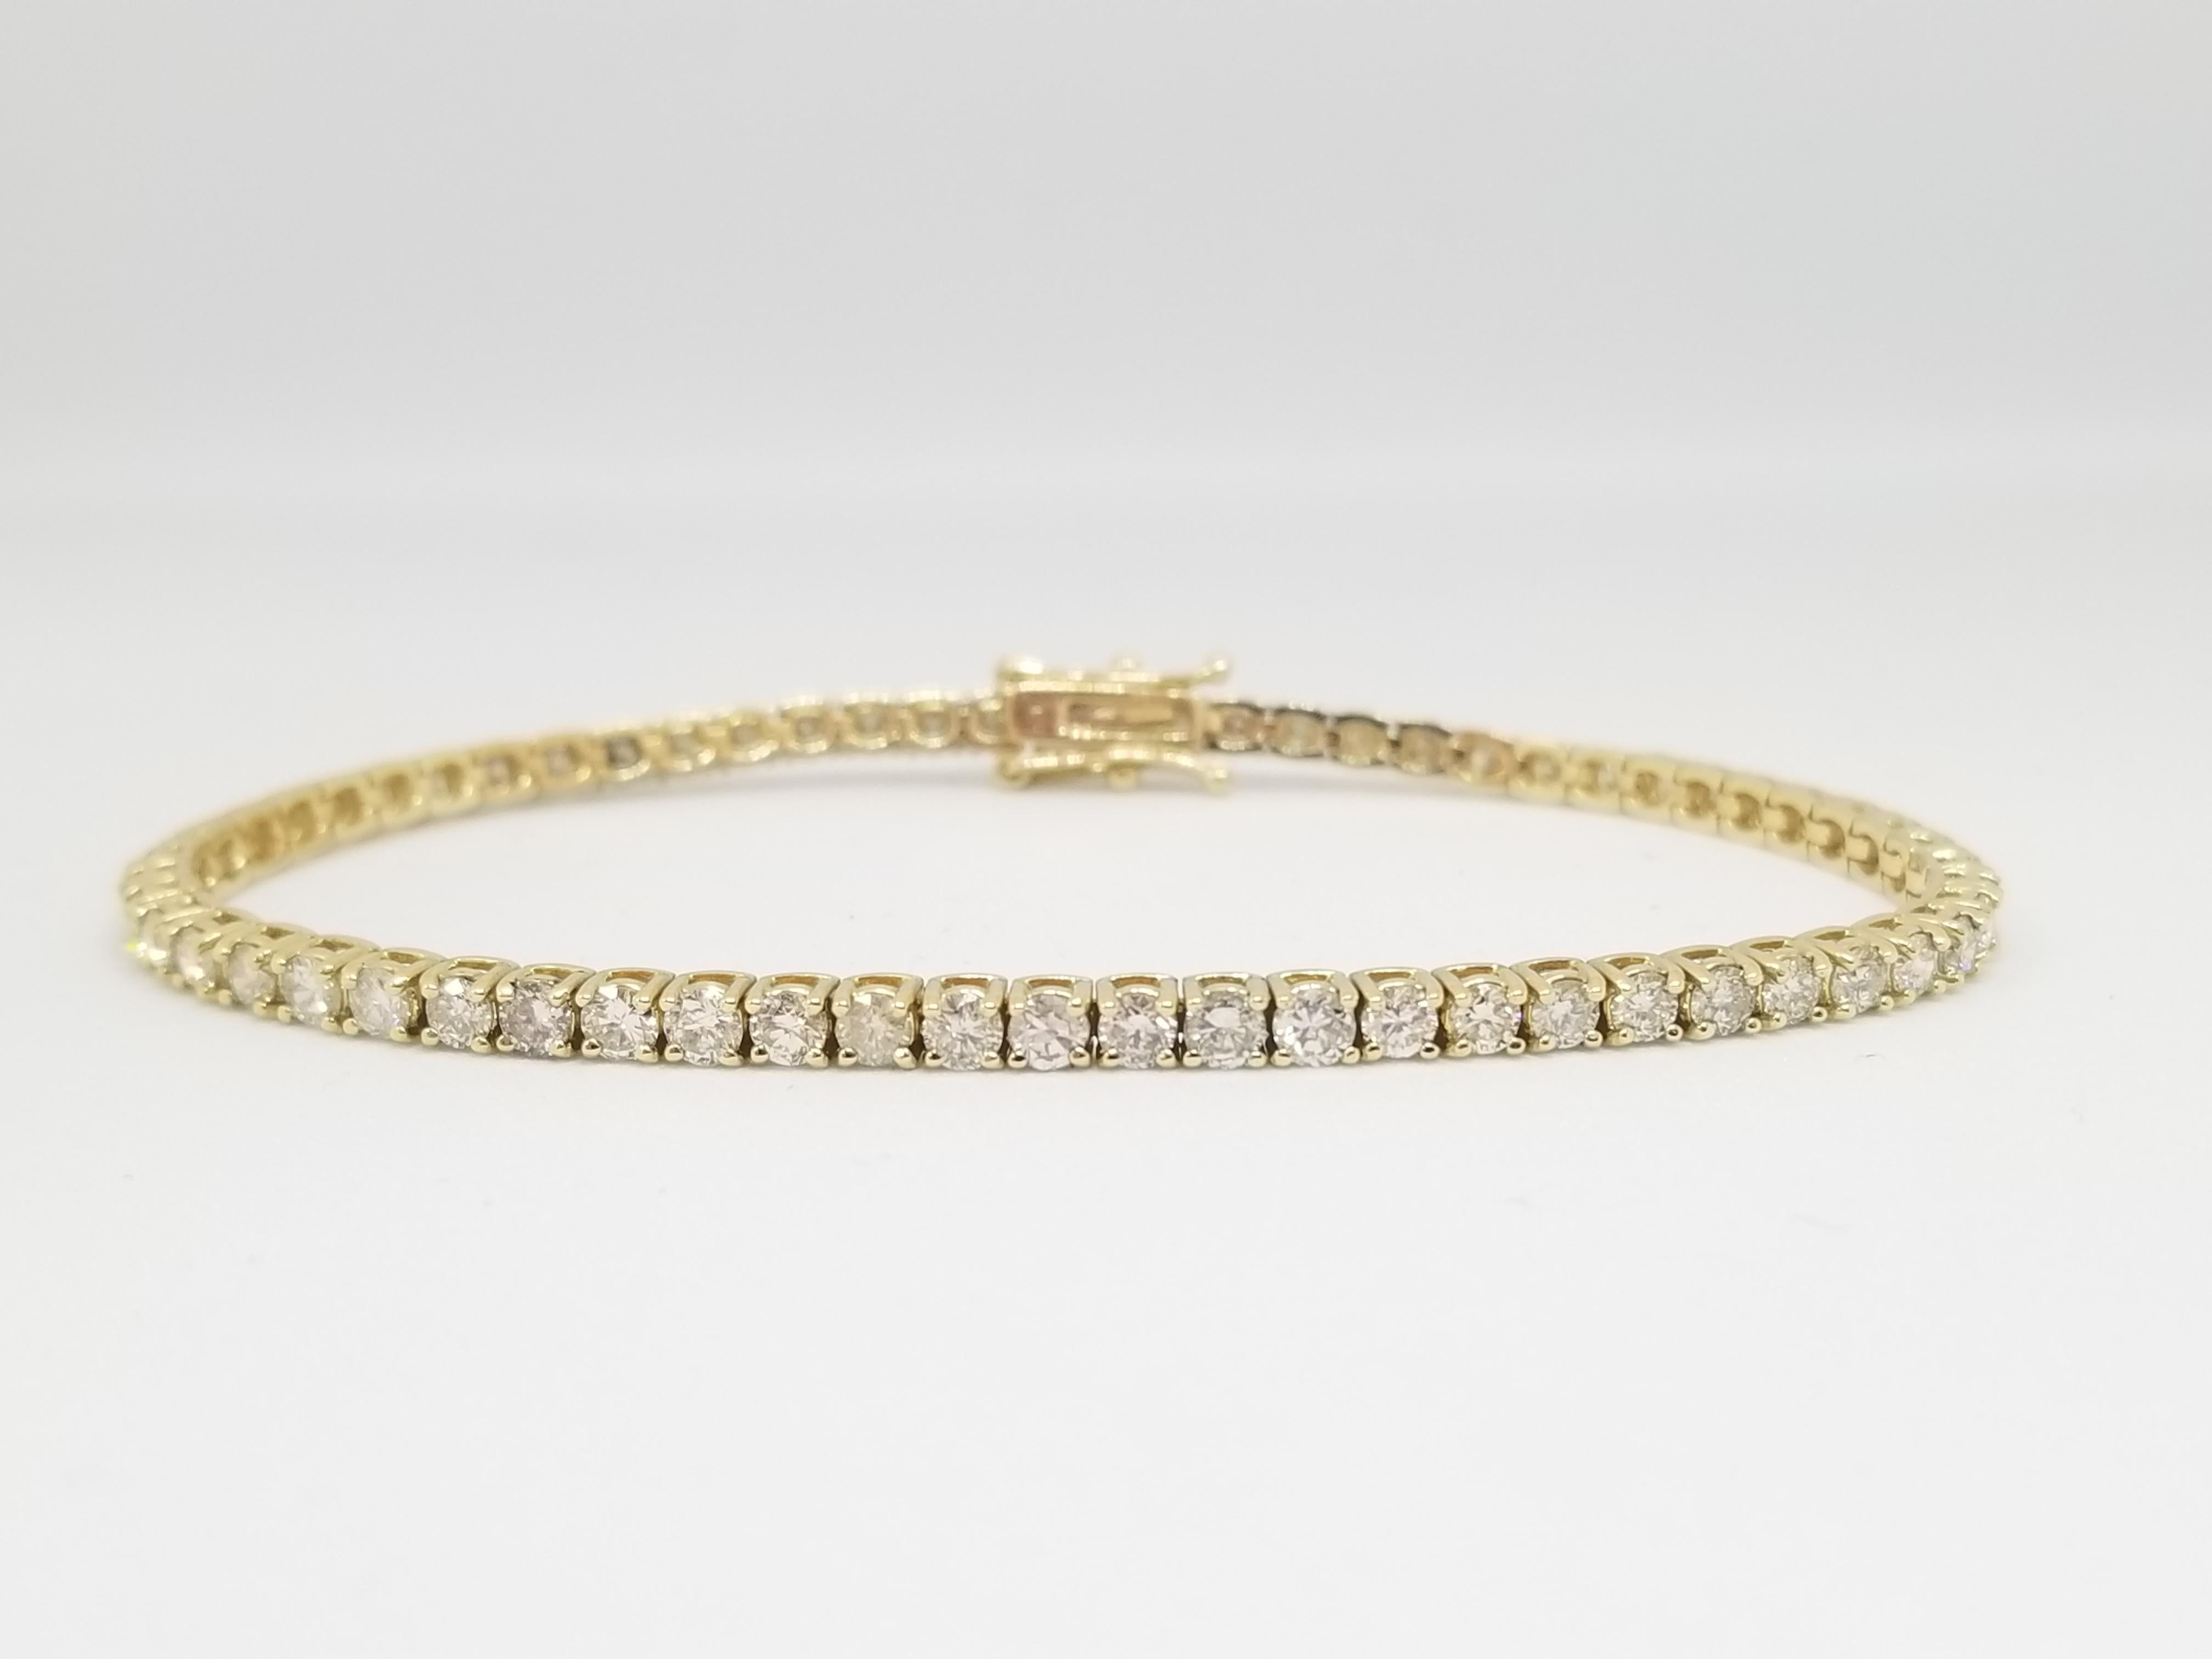 A quality tennis bracelet, round-brilliant cut diamonds. set on 14k yellow gold. each stone is set in a classic four-prong style for maximum light brilliance. 6.5 inch length.  
Average Color H
Average Clarity VS-SI
2.8 mm wide.